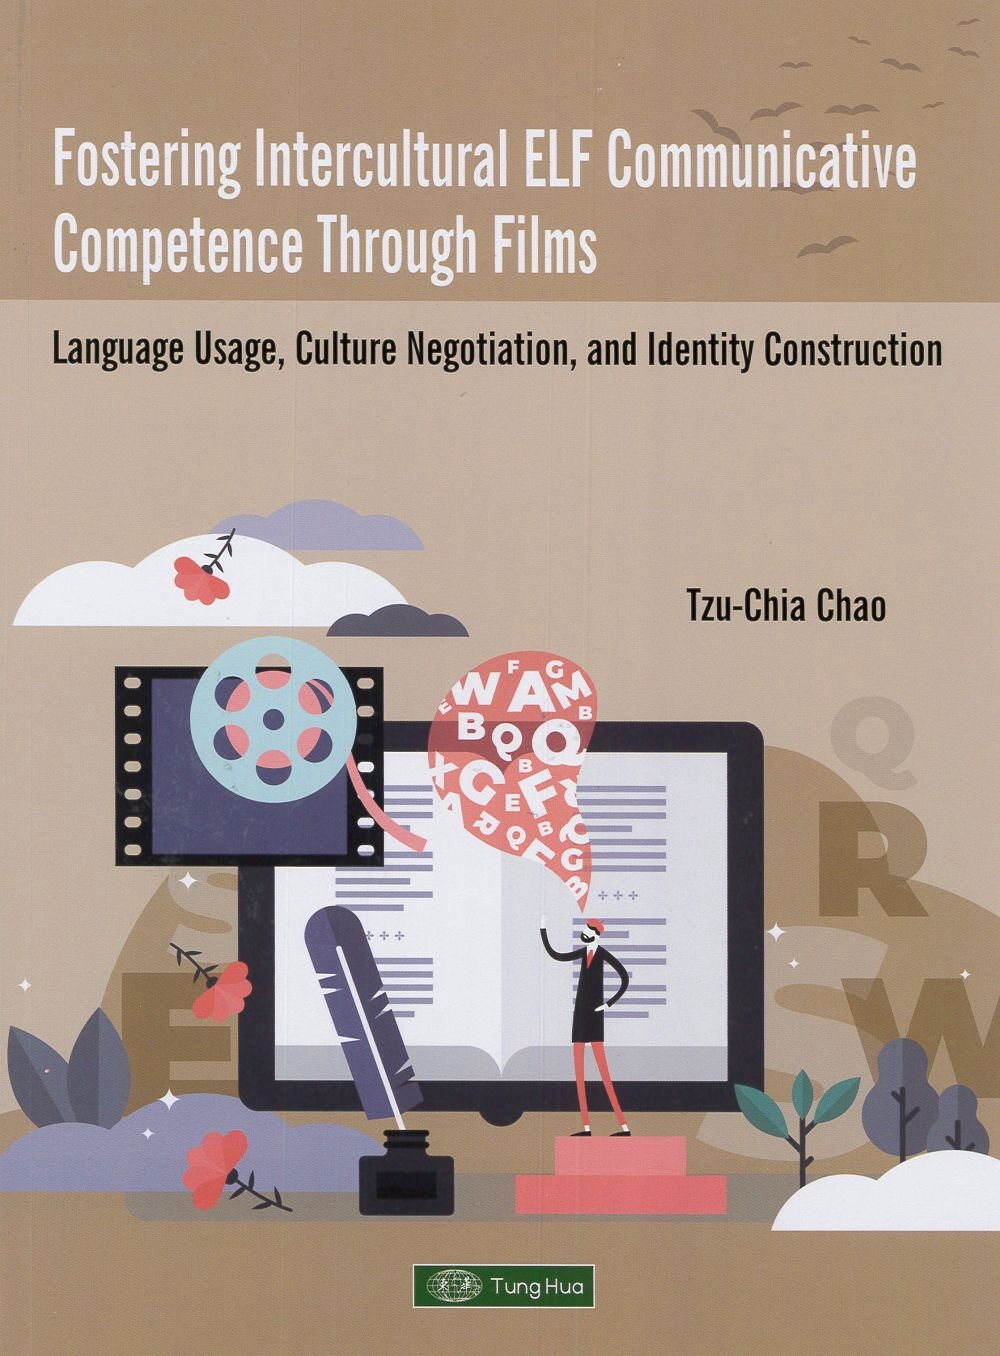 Fostering Intercultural ELF Communicative Competence Through Films：Language Usage, Culture Negotiation and Identity Construction